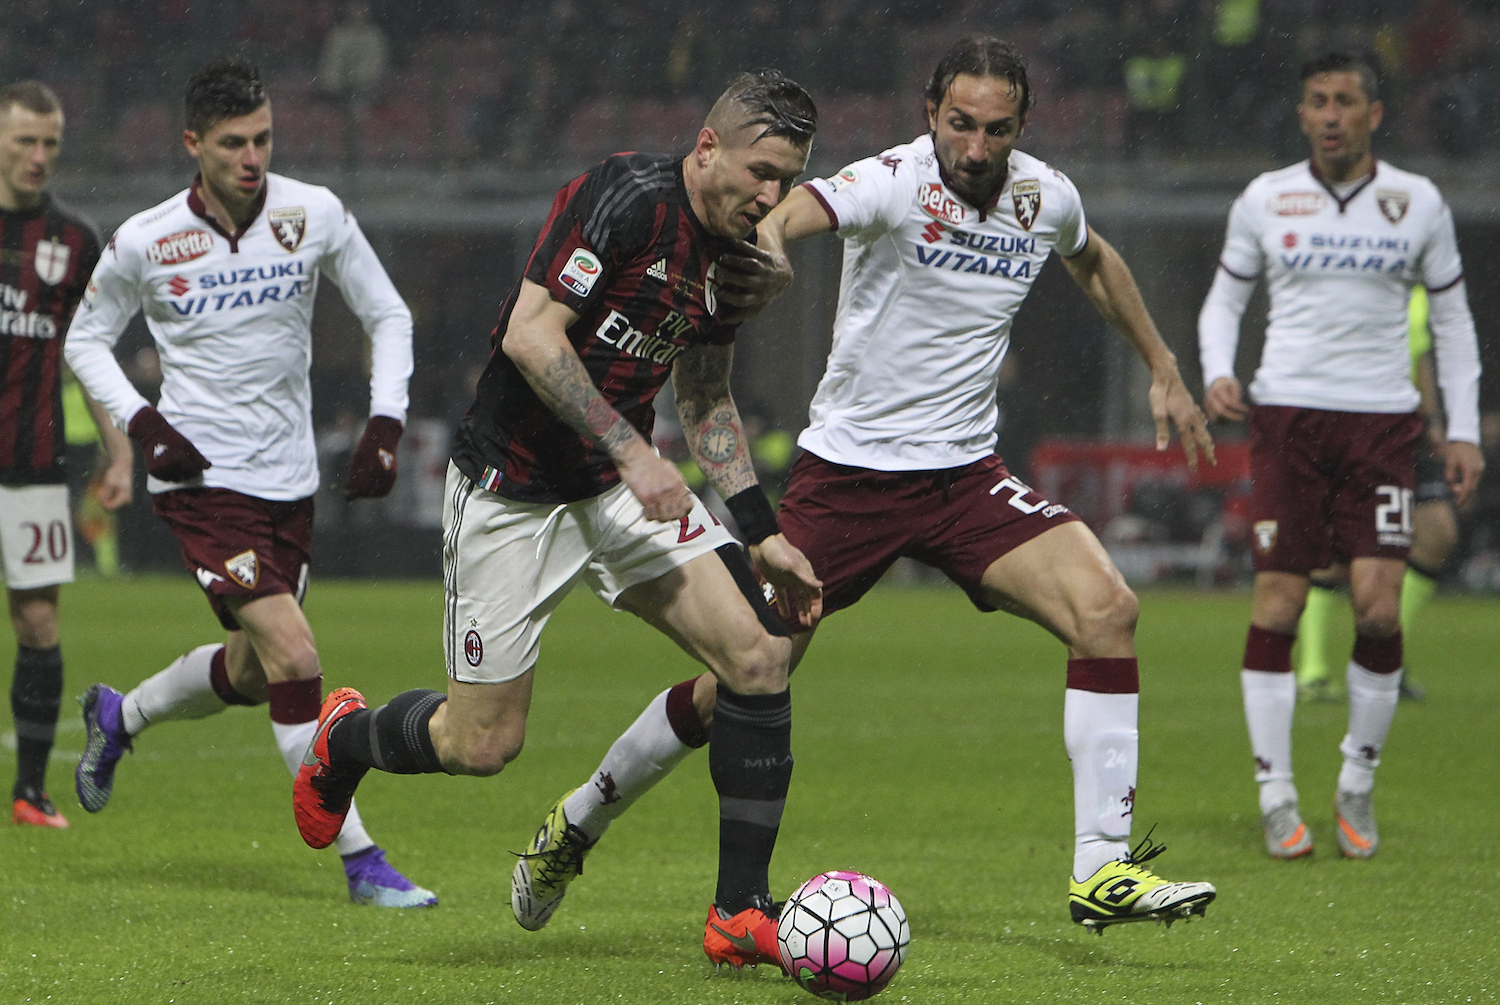 Kucka on one of his many darting runs. | Marco Luzzani/Getty Images